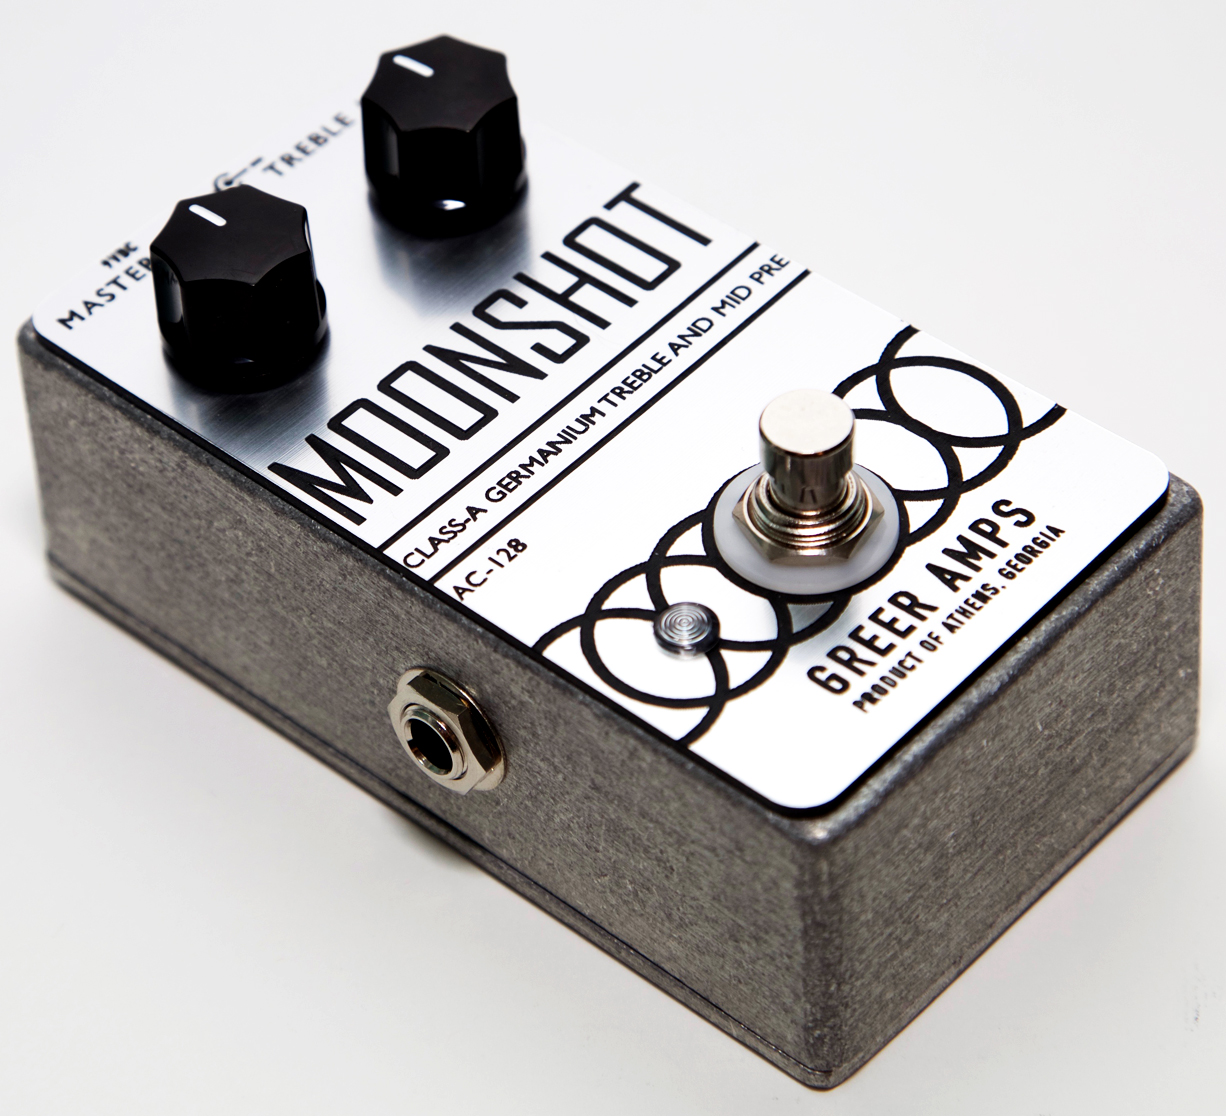 Greer Amps Moonshot Germanium Preamp - Overdrive, distortion & fuzz effect pedal - Variation 1